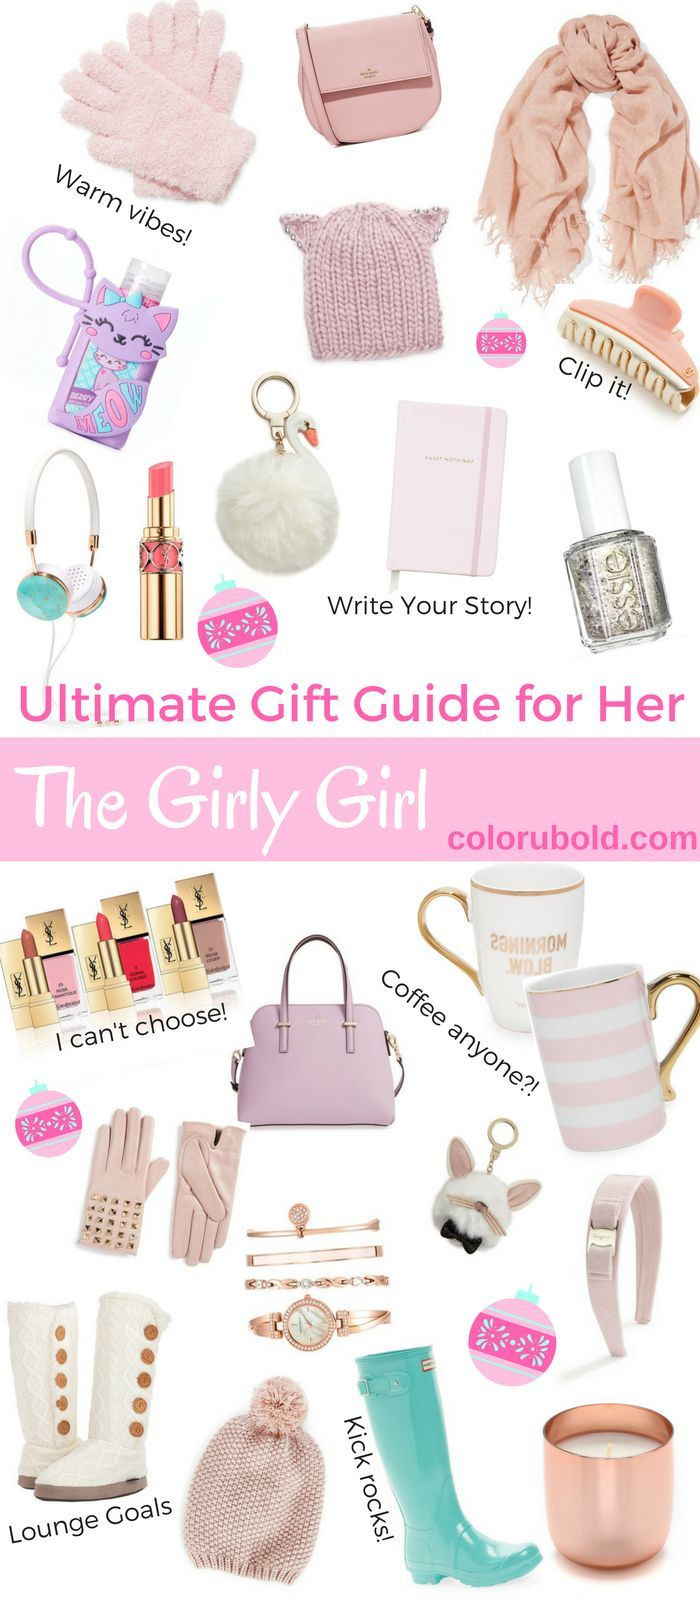 Gift Ideas Girls
 The Ultimate Gift Guide for the Girly Girl